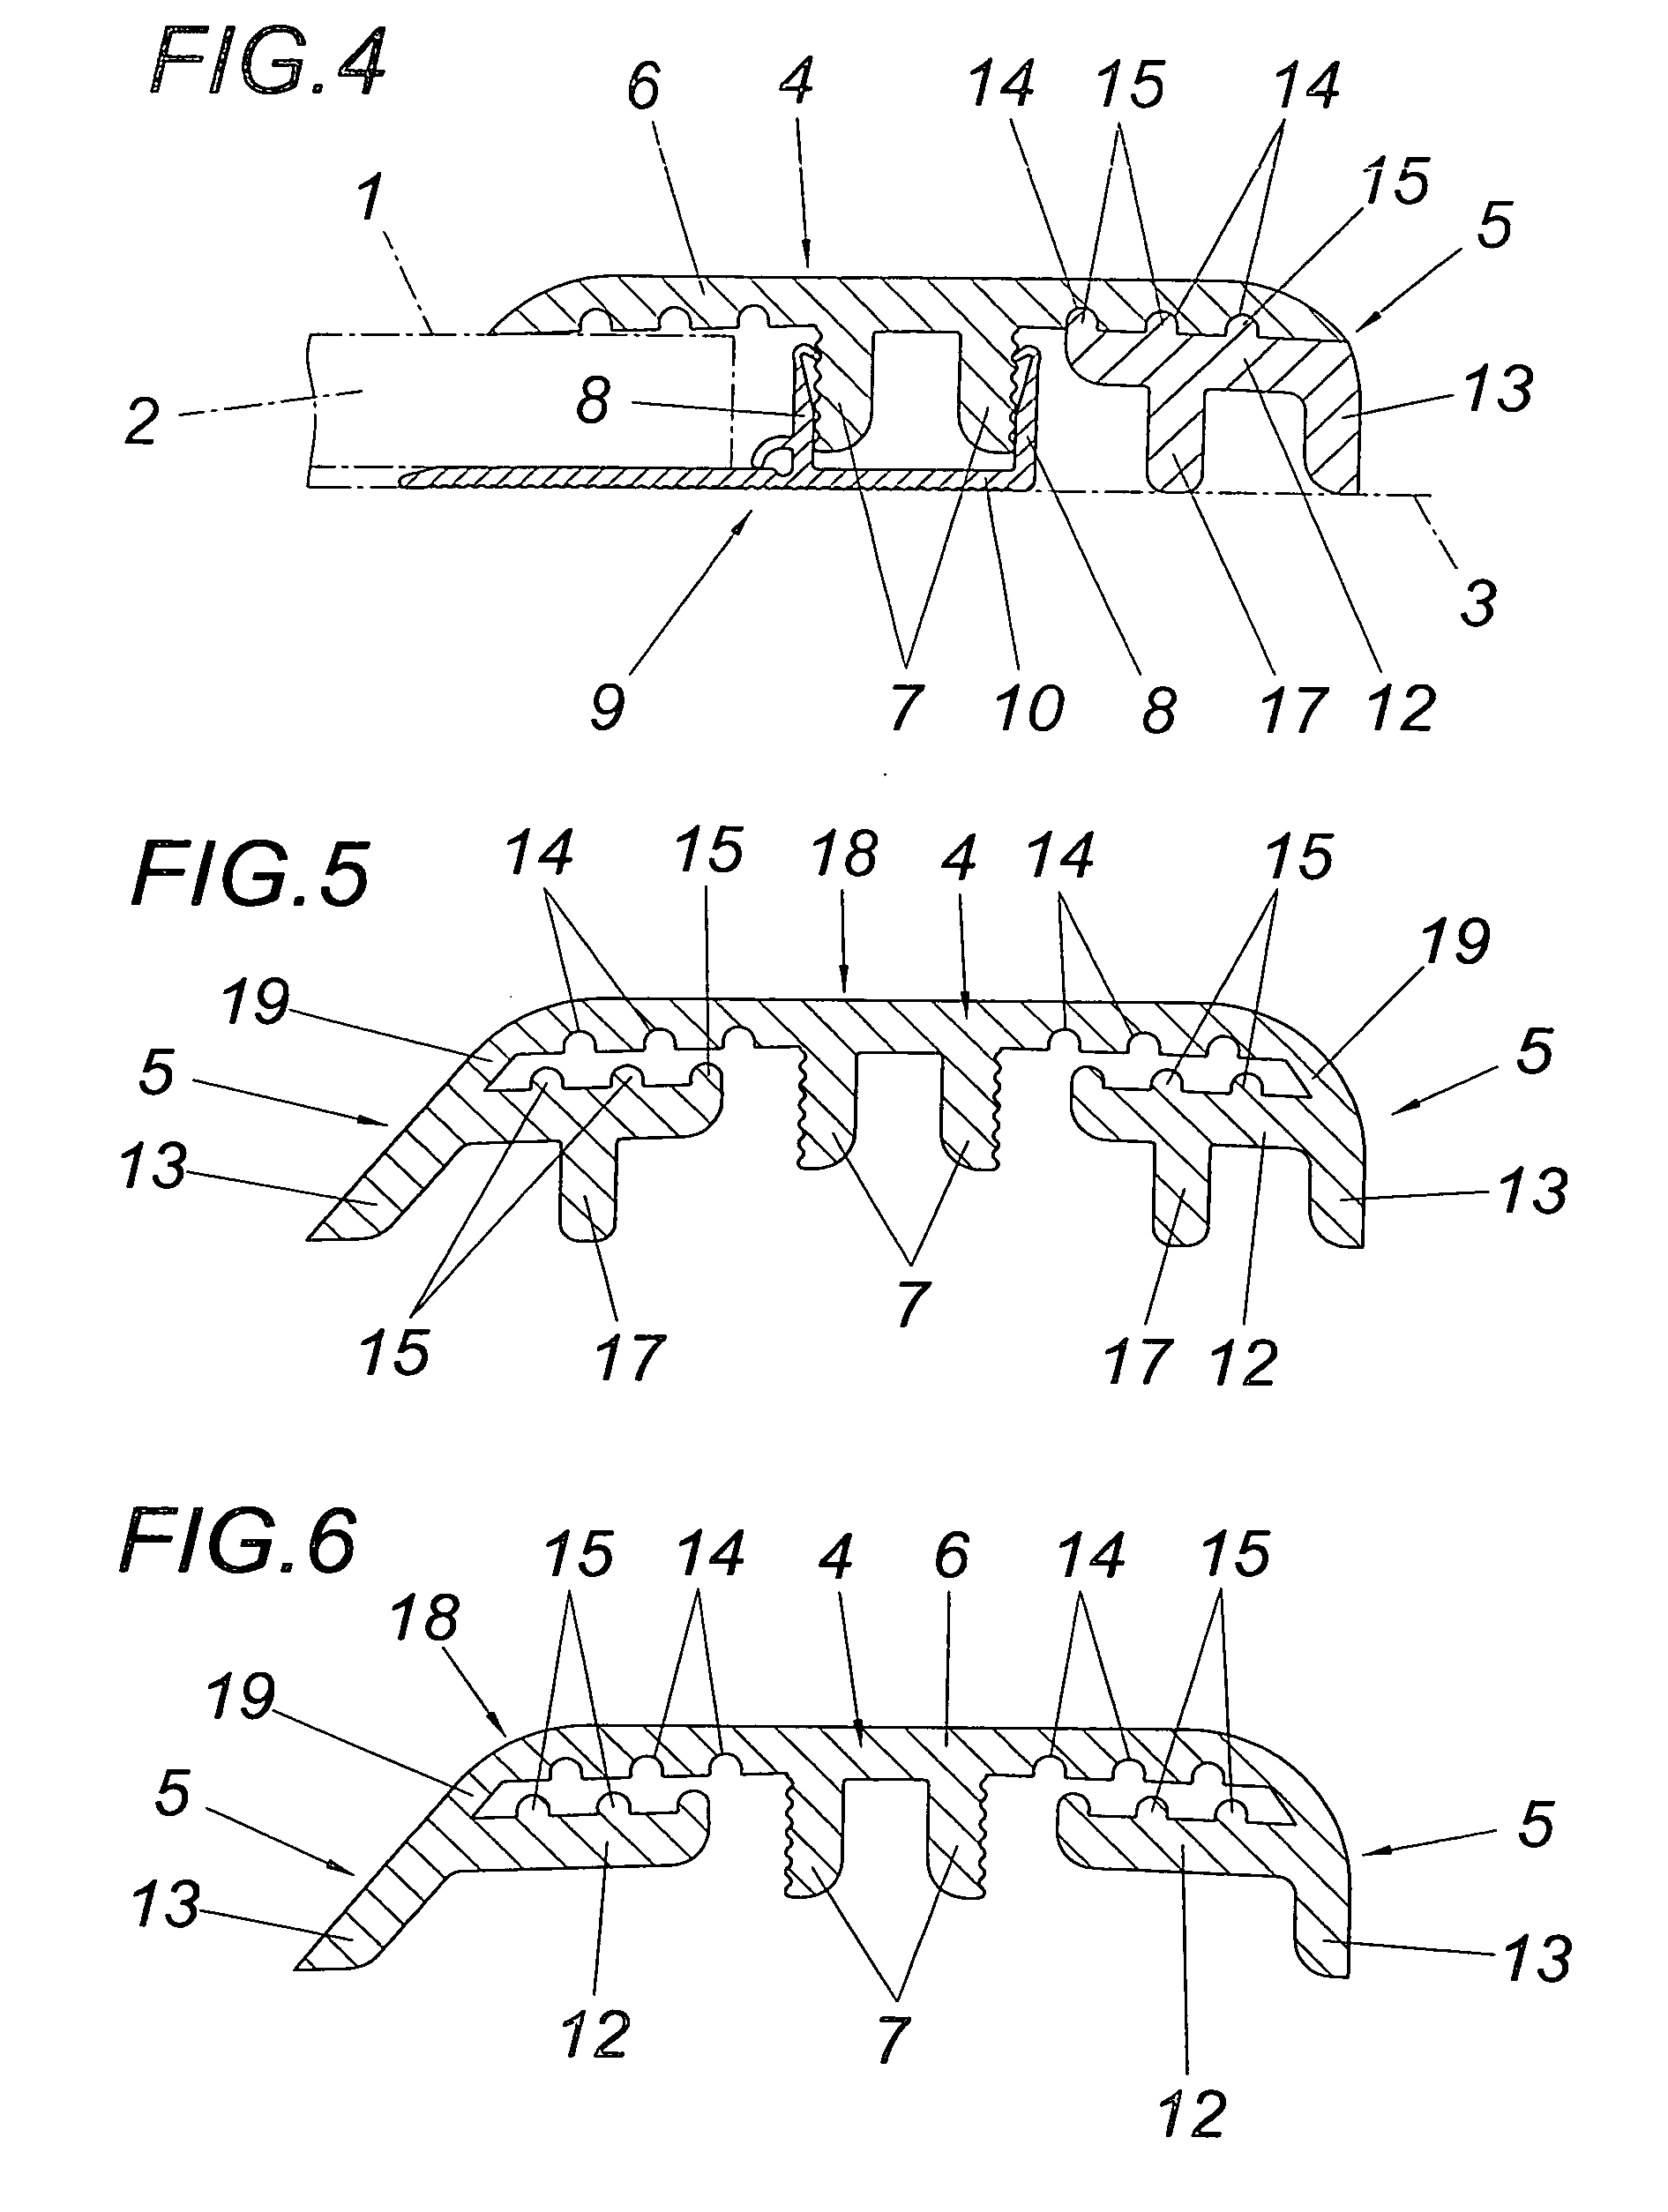 Covering Device for Floor Coverings